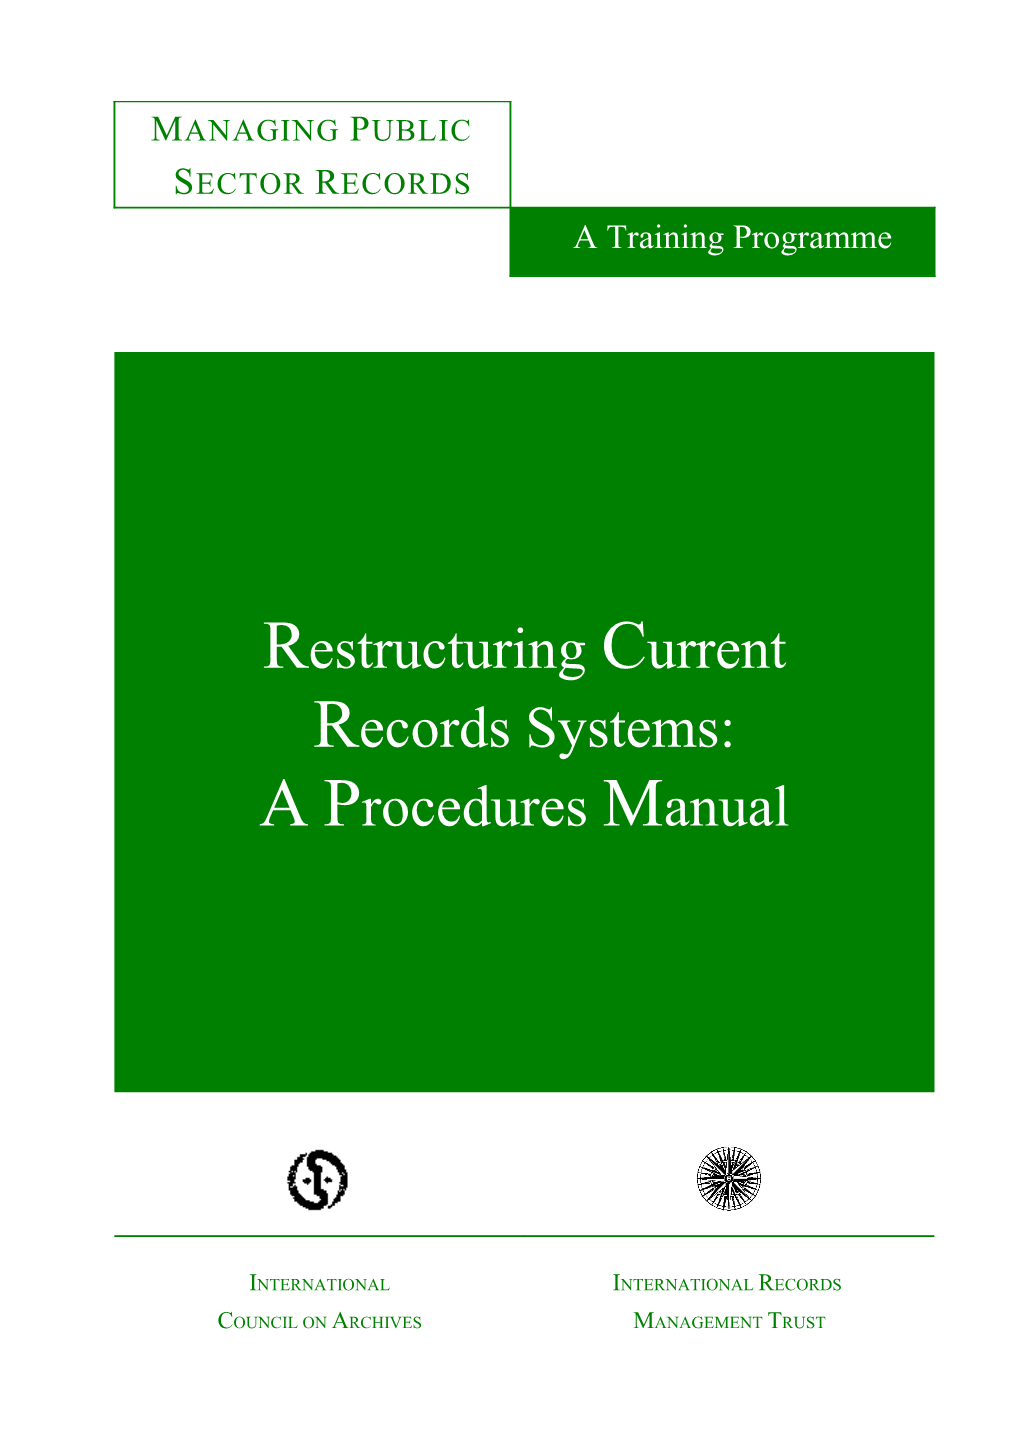 Restructuring Current Records Systems: a Procedures Manual